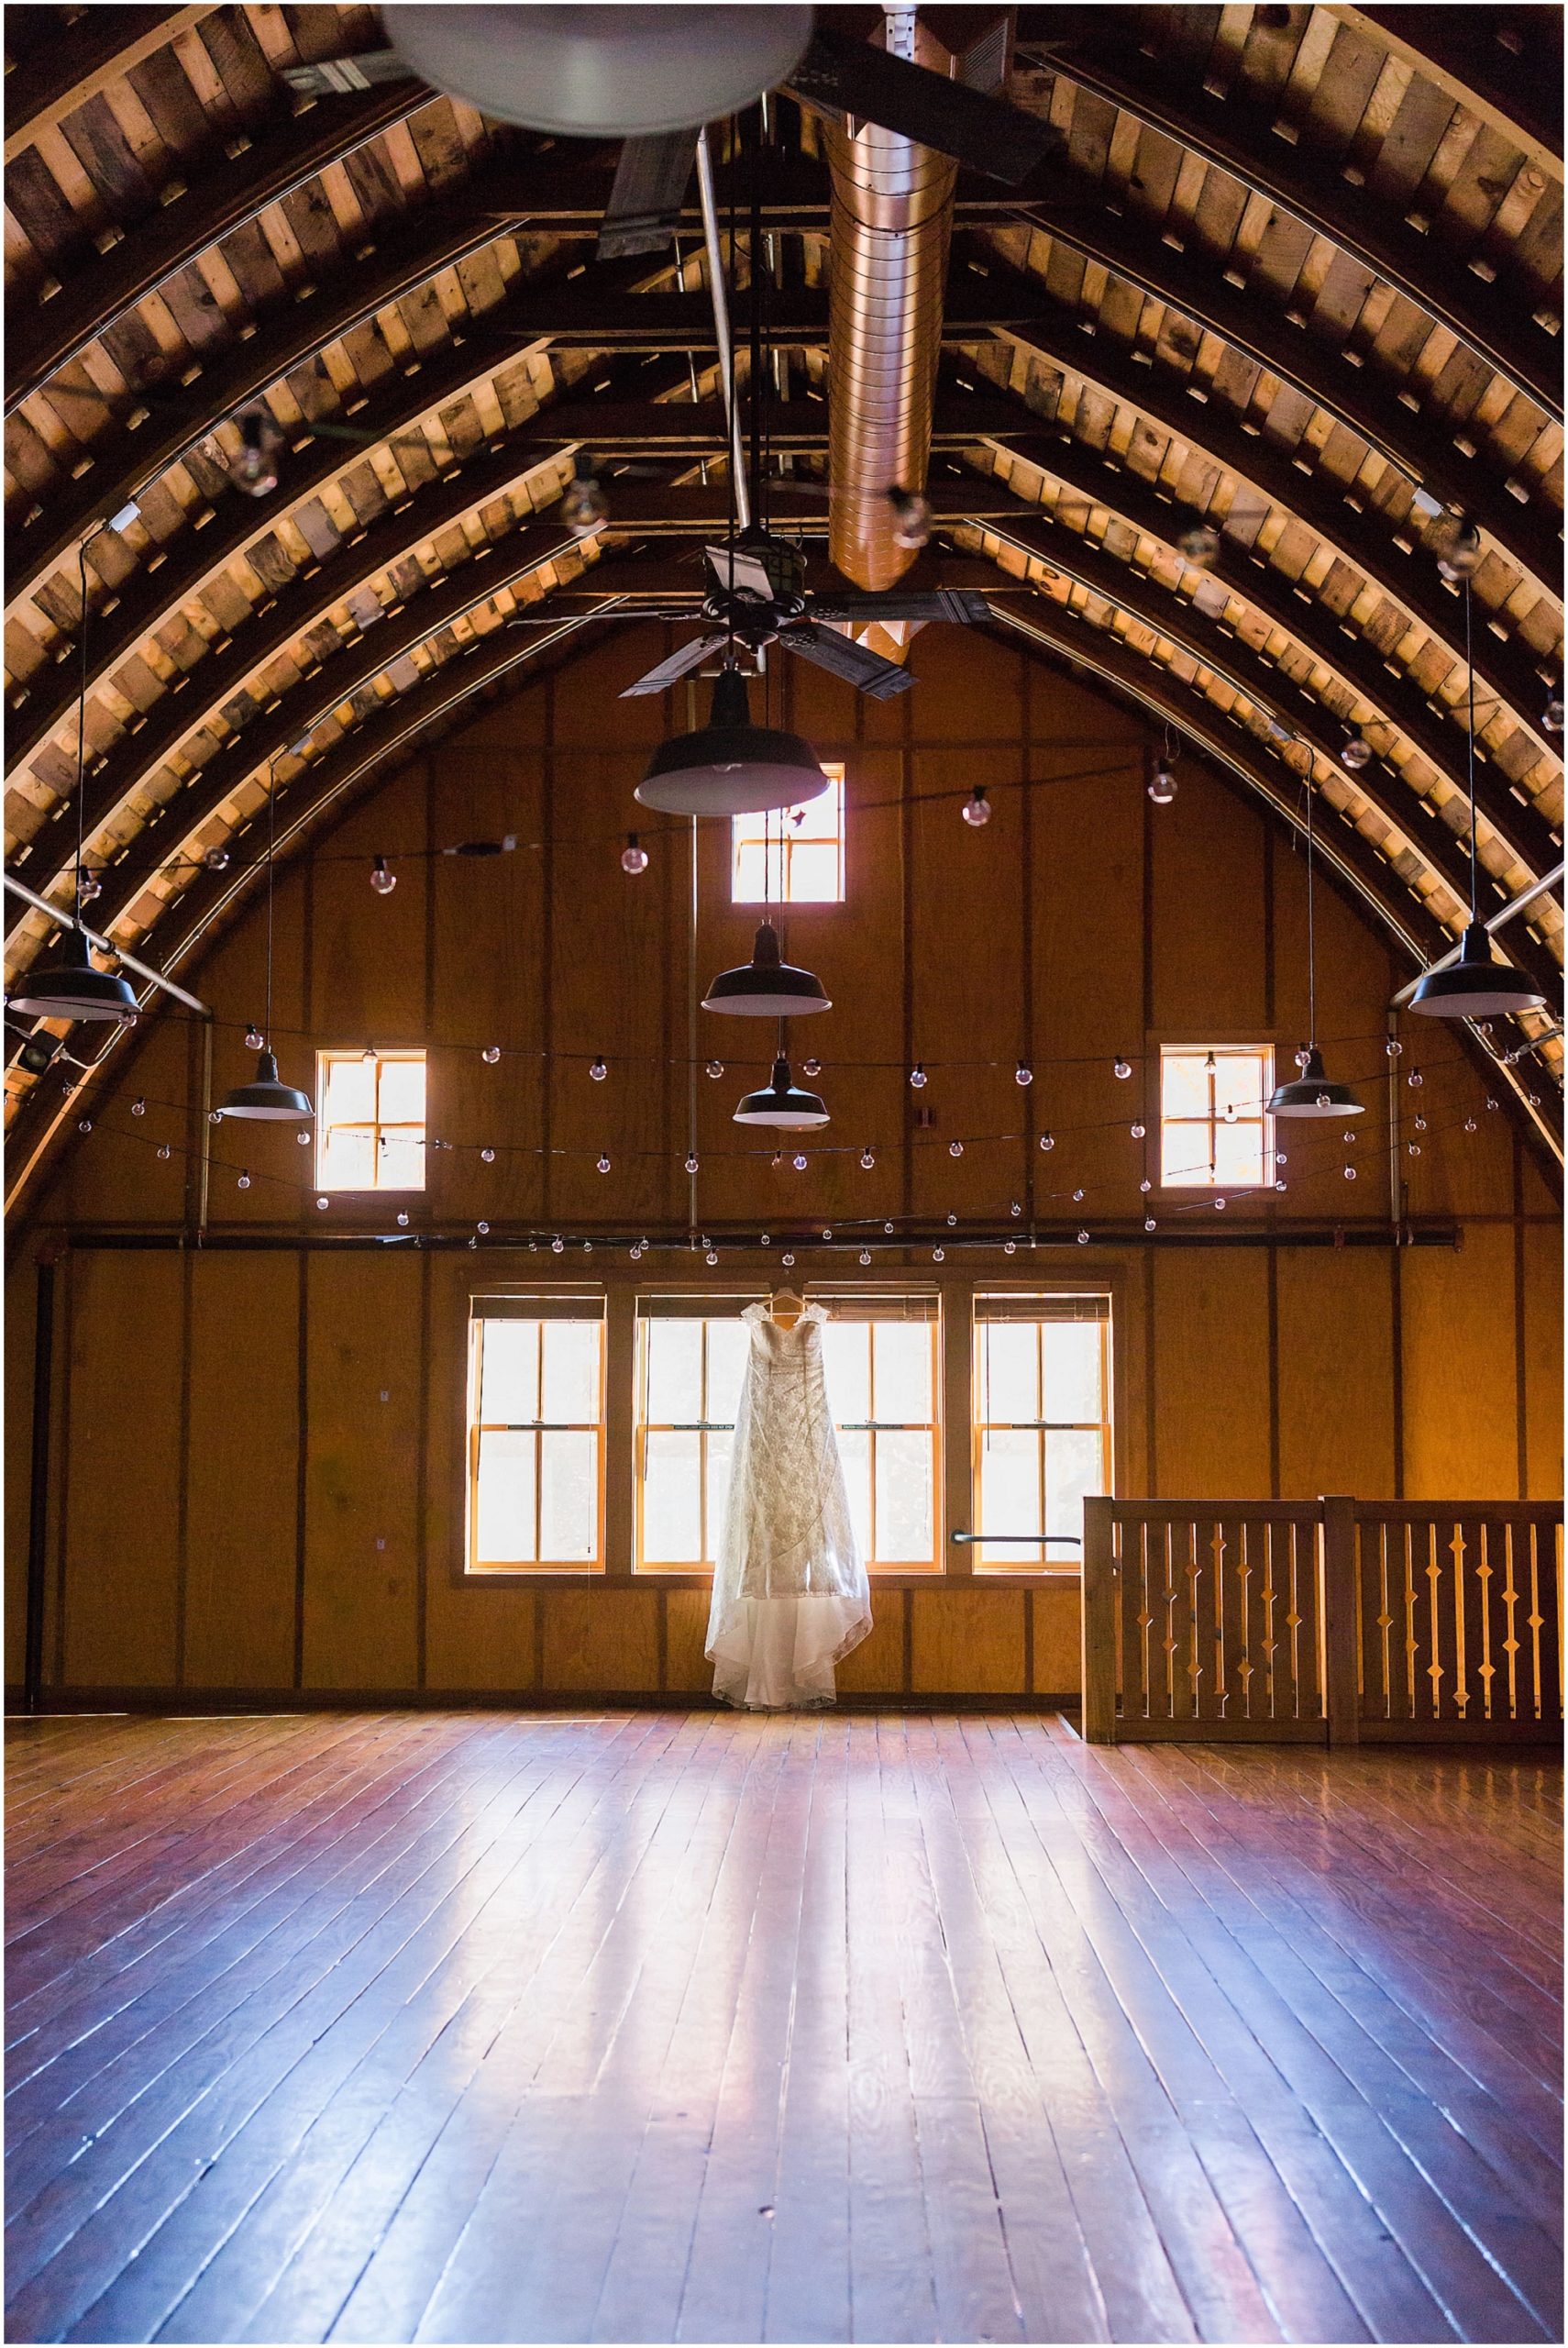 A gorgeous bride's dress hangs from the windows of the historic Hollinshead Barn wedding venue in Bend, OR. | Erica Swantek Photography